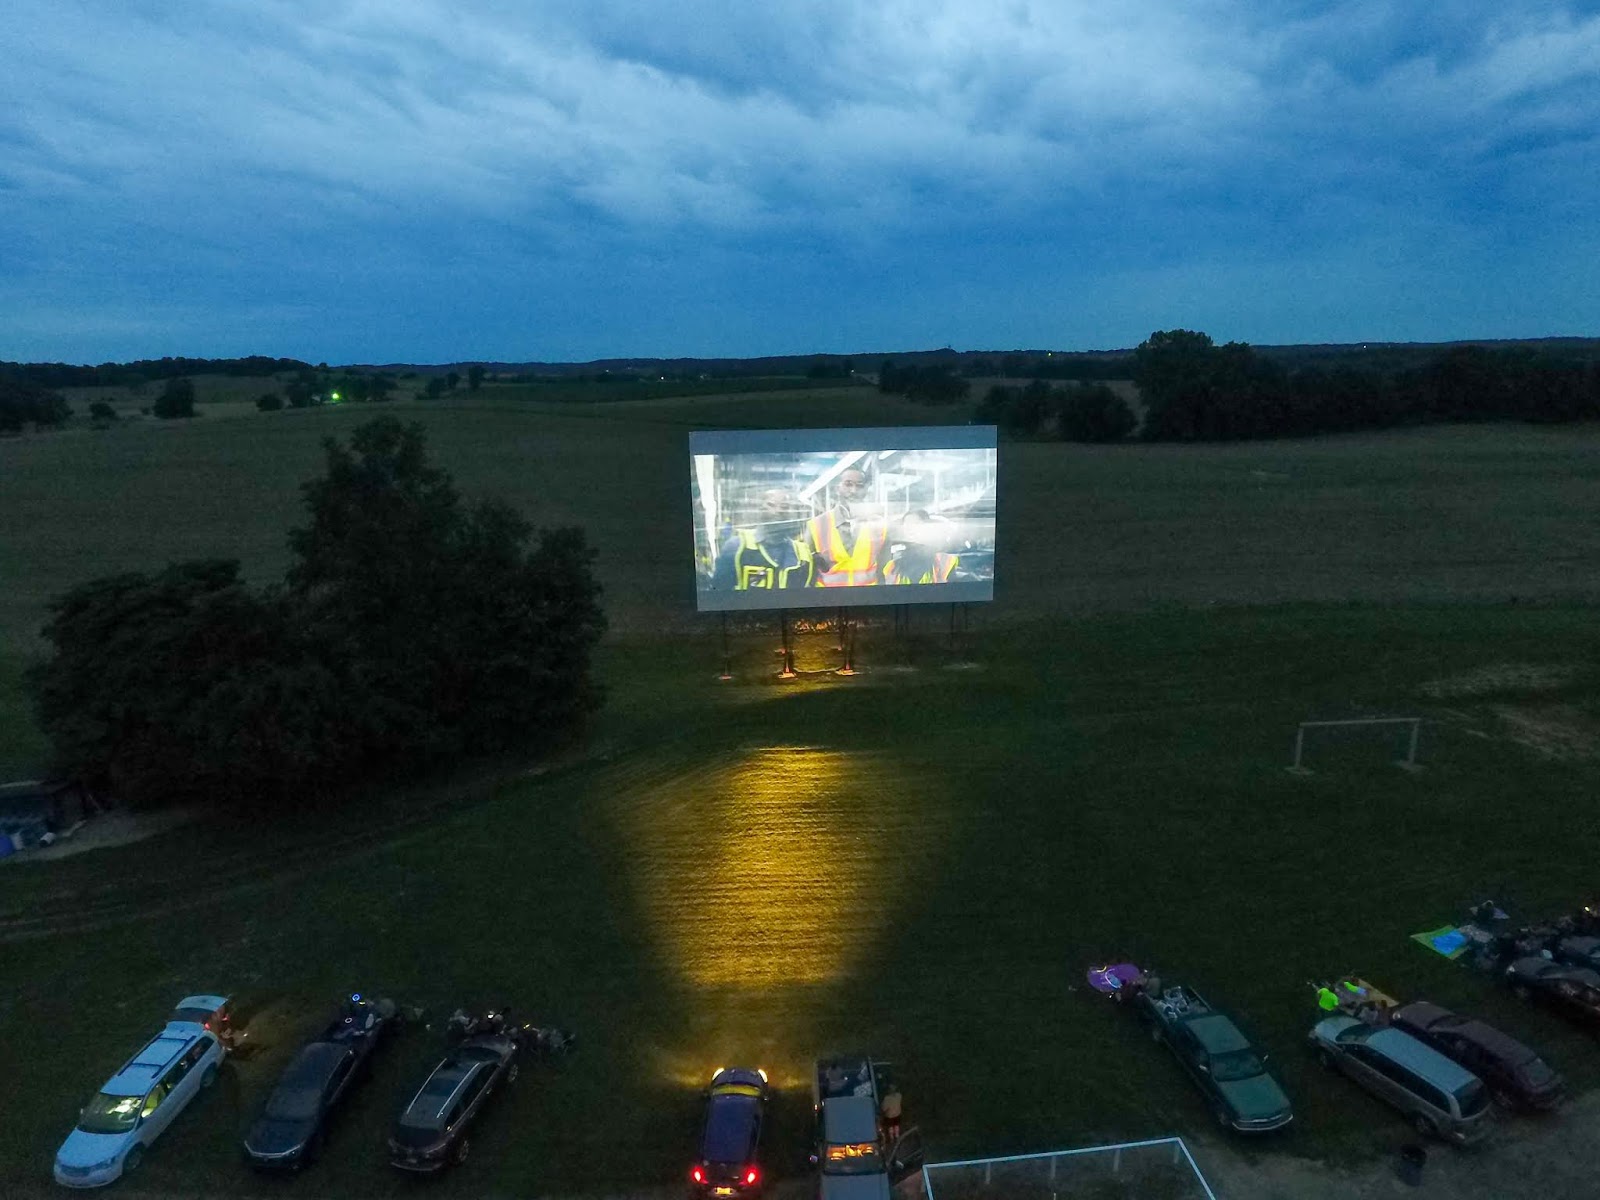 a screen in a field with cars parked in front of it